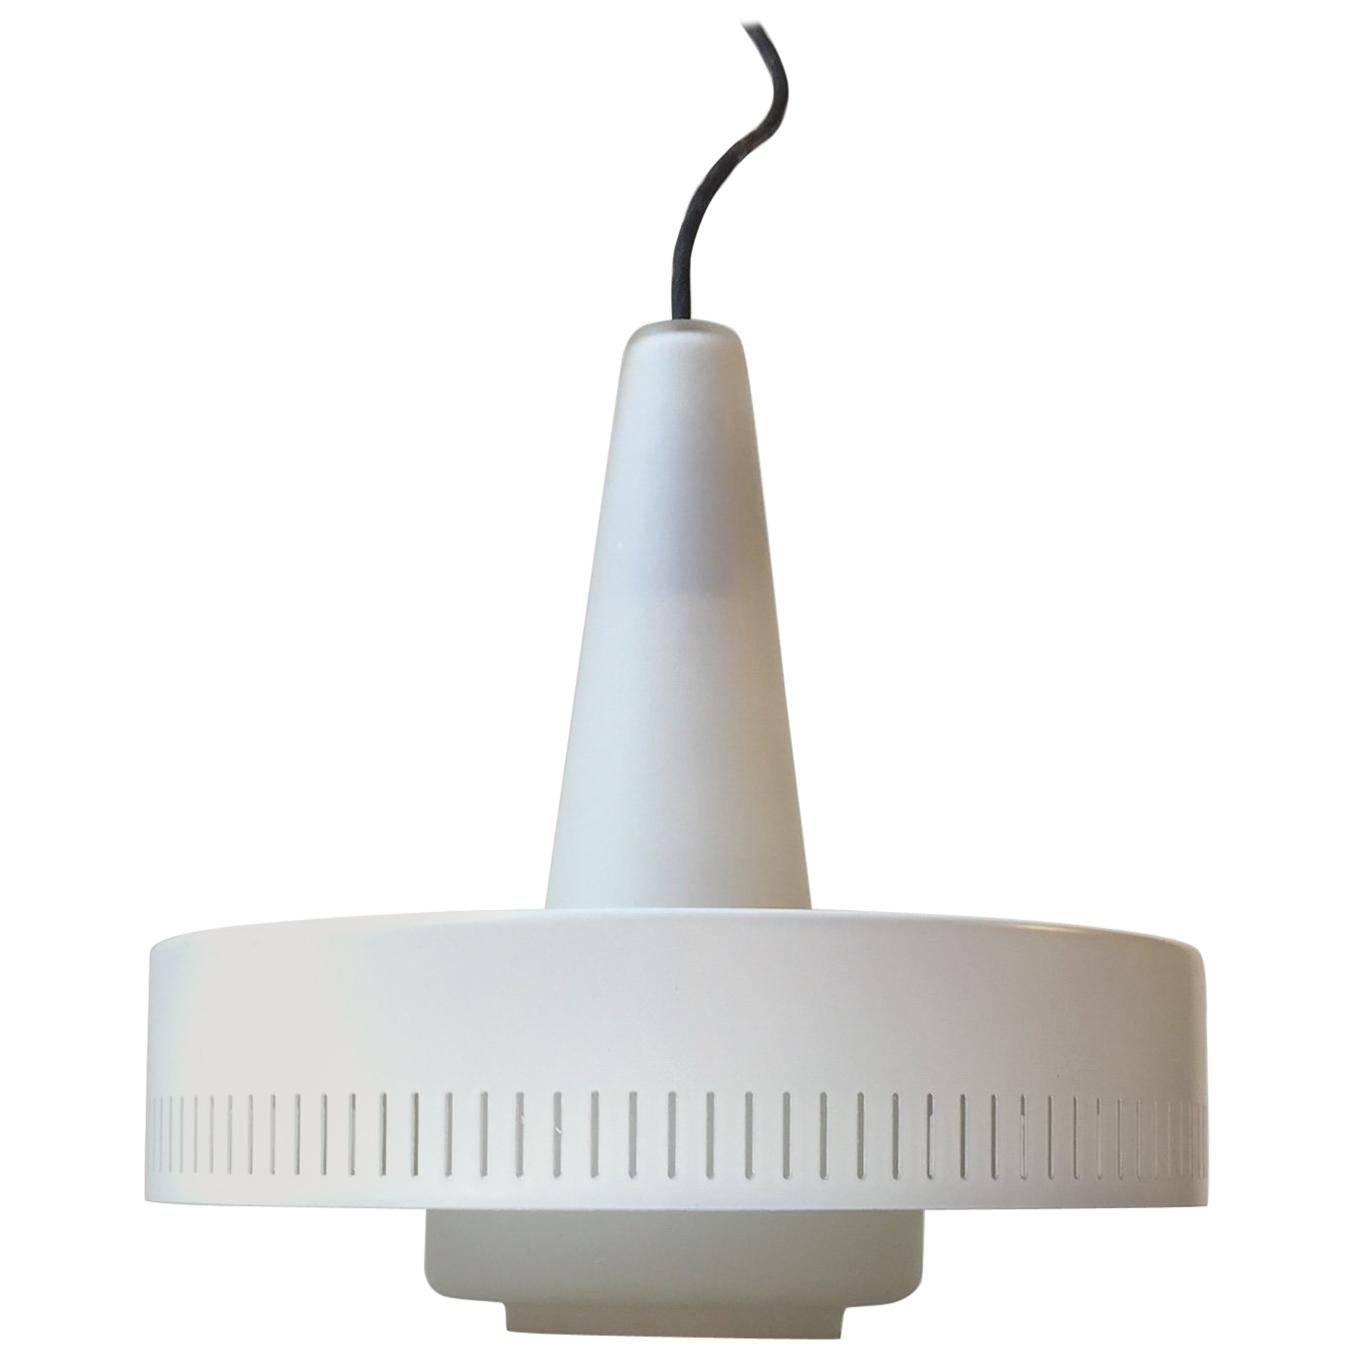 Danish Midcentury Ceiling Light by Bent Karlby for Lyfa, 1950s For Sale